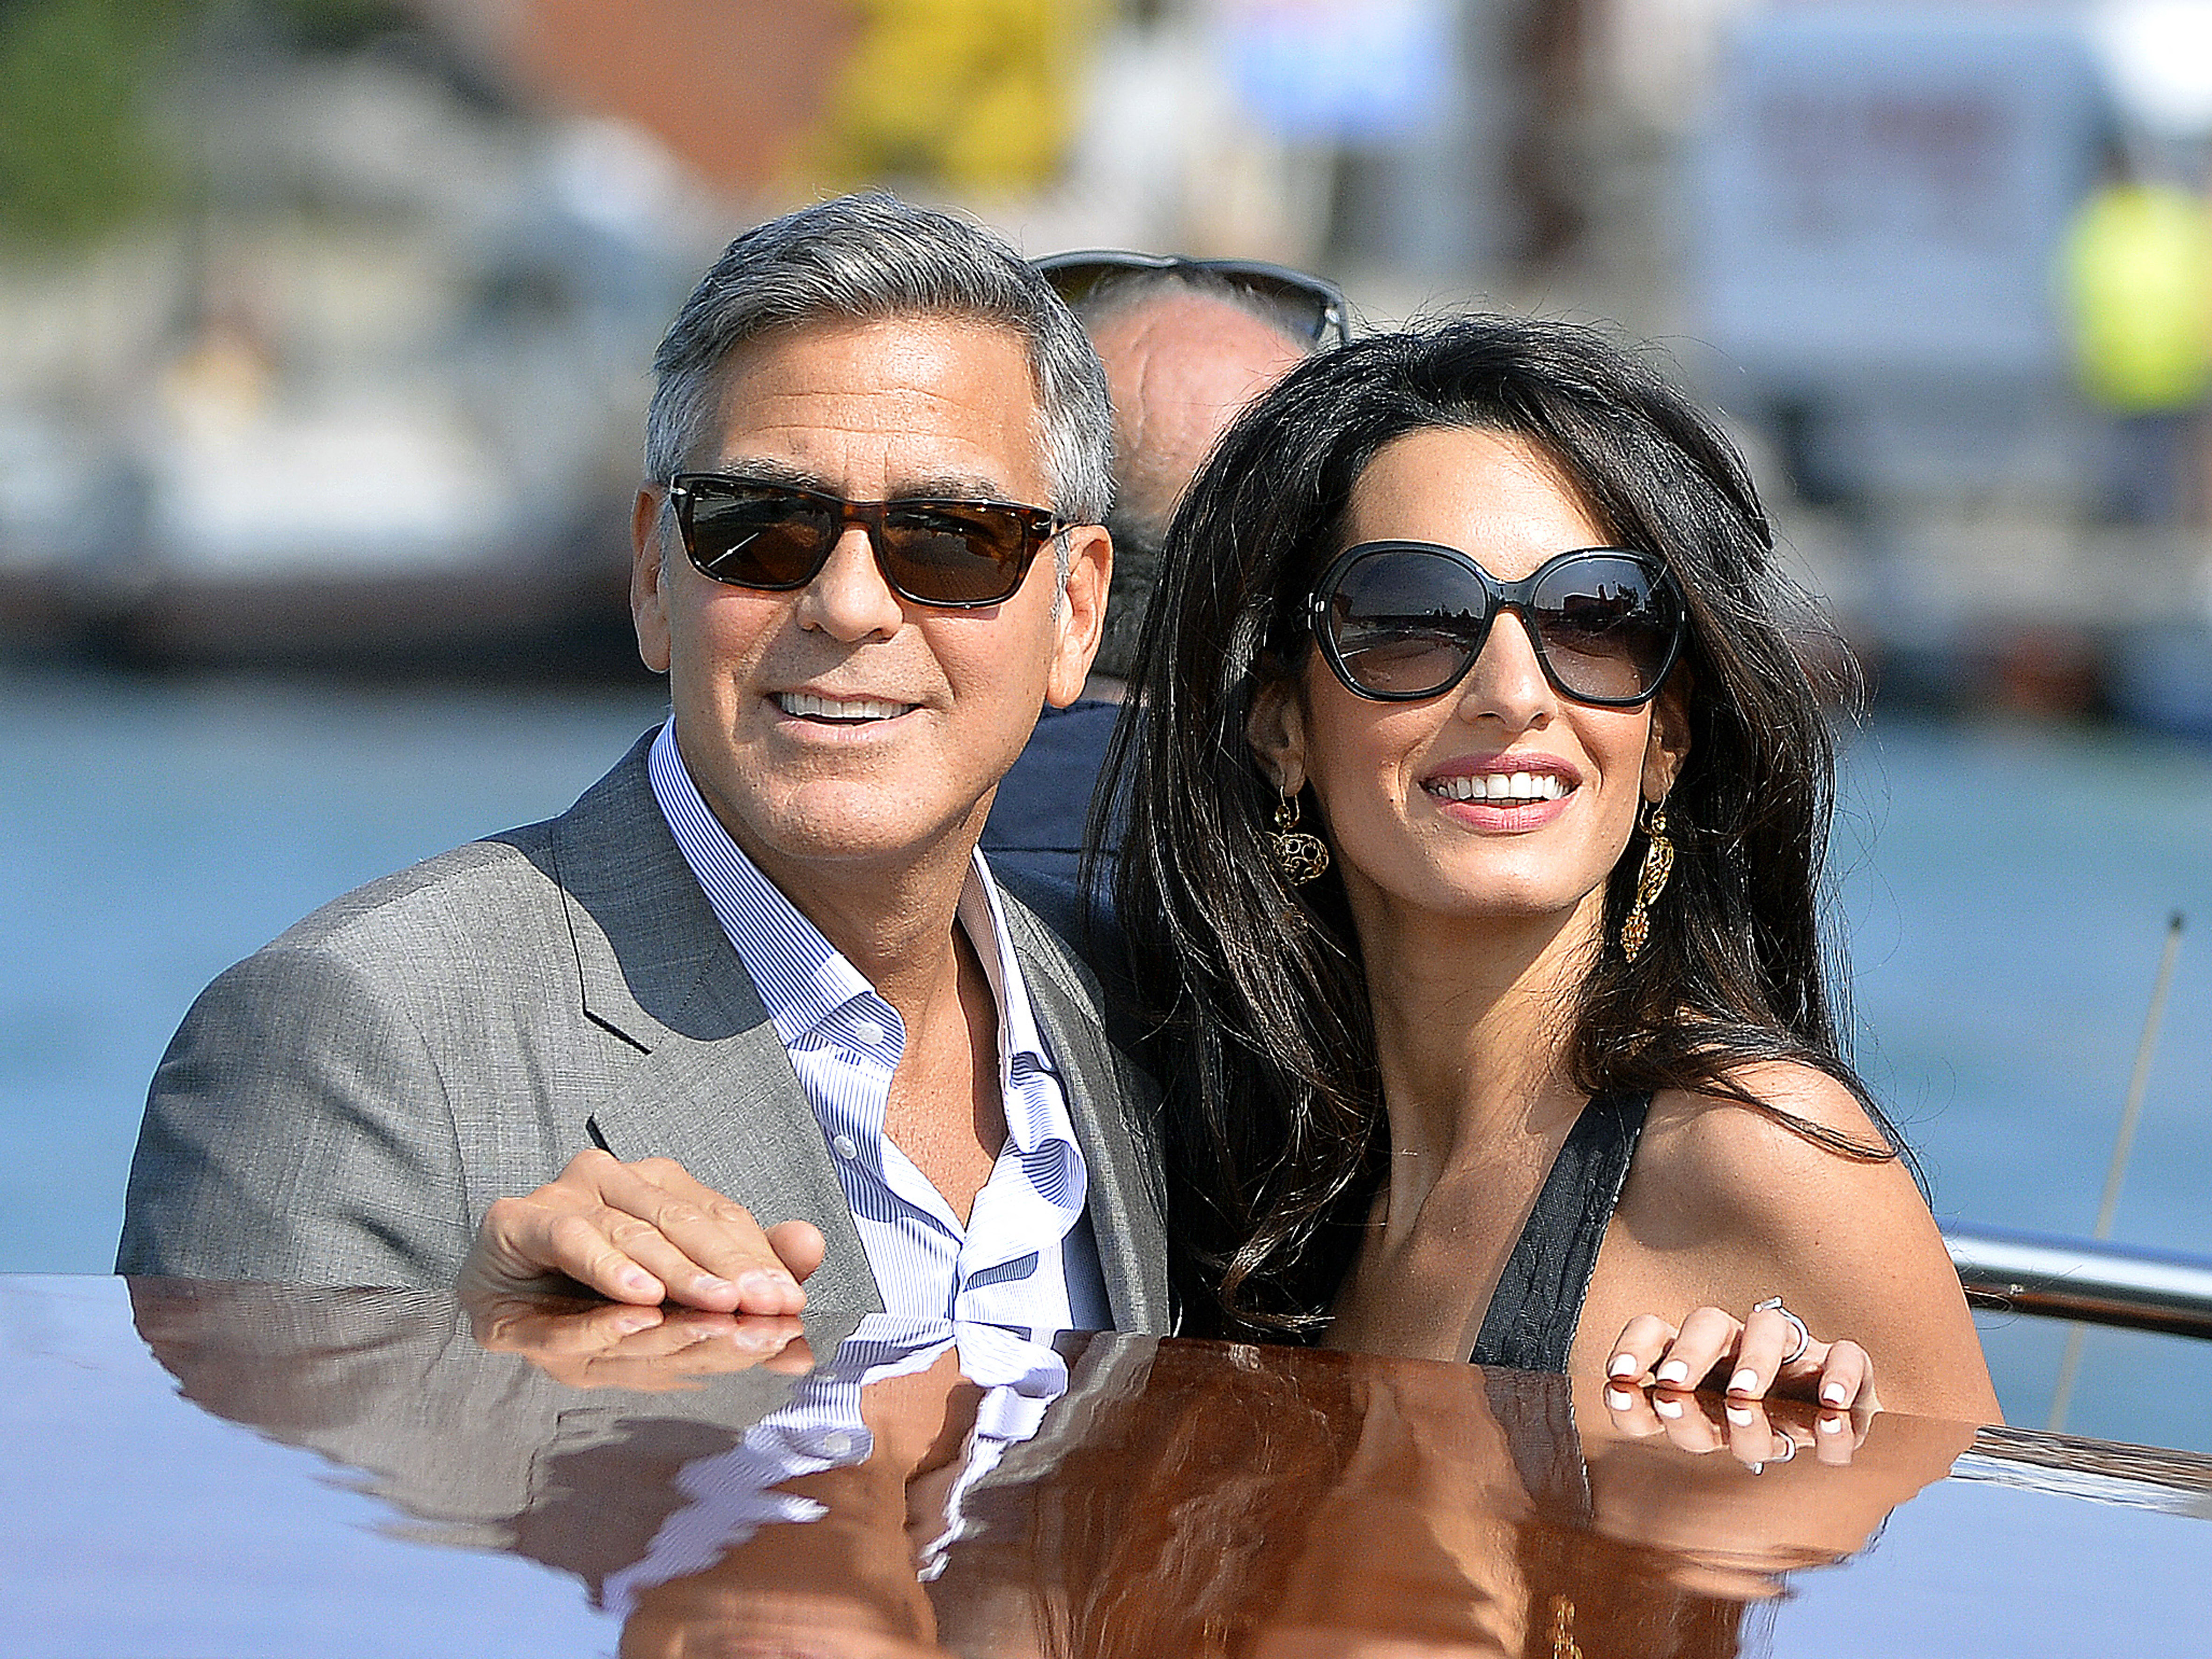 George Clooney and Amal Alamuddin pictured on a taxi boat on September 26, 2014 in Venice, France. | Source: Getty Images